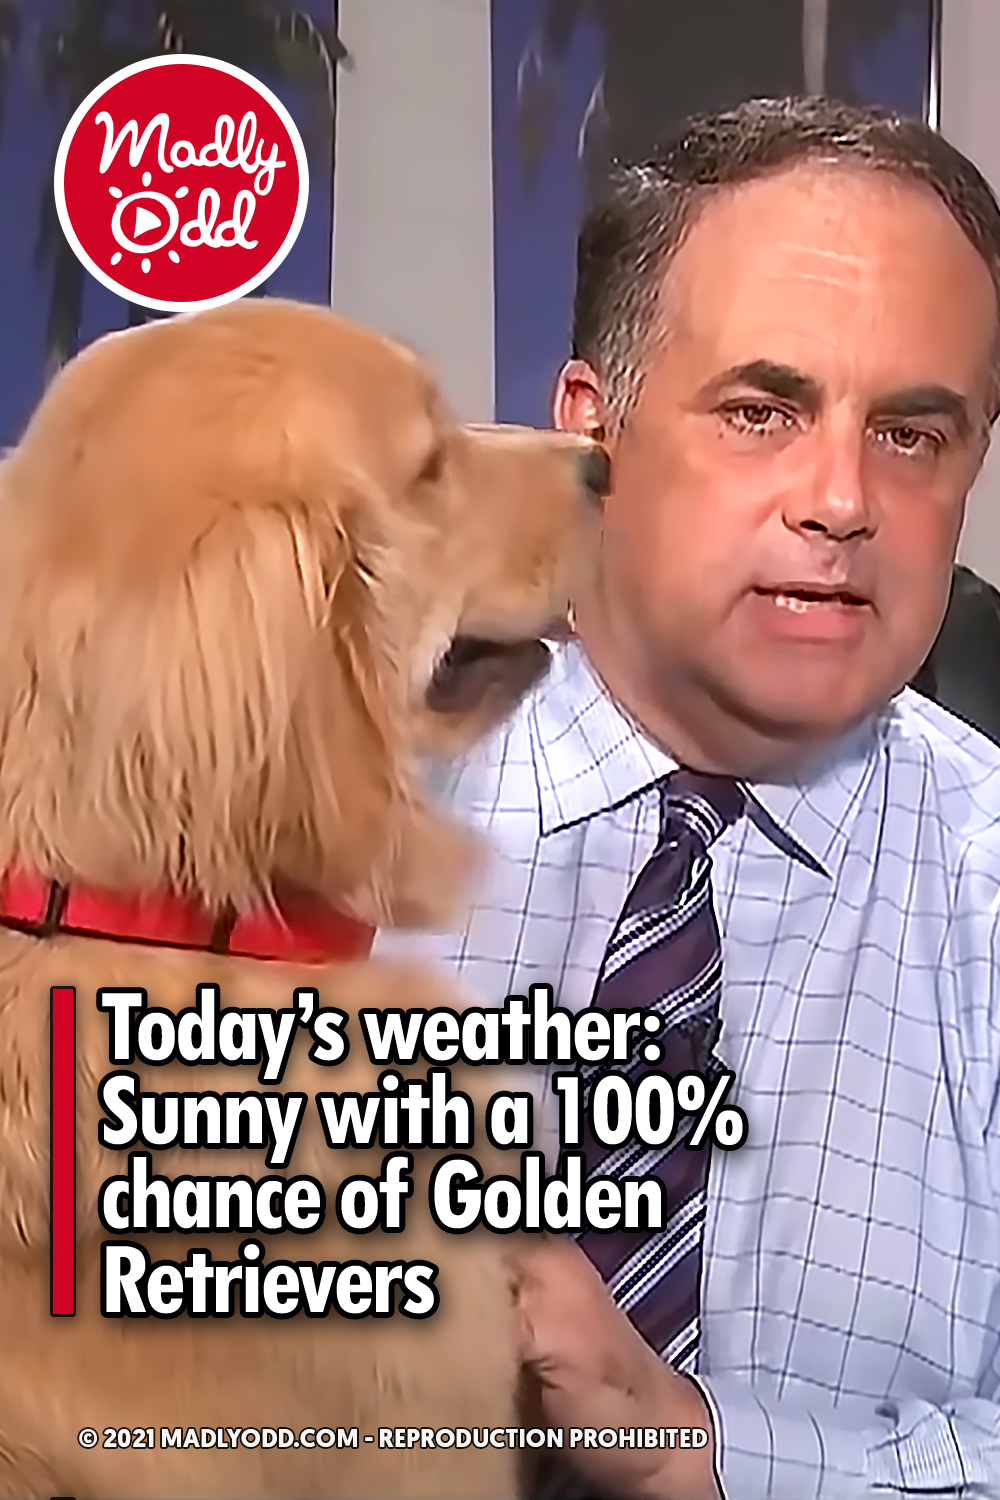 Today’s weather: Sunny with a 100% chance of Golden Retrievers